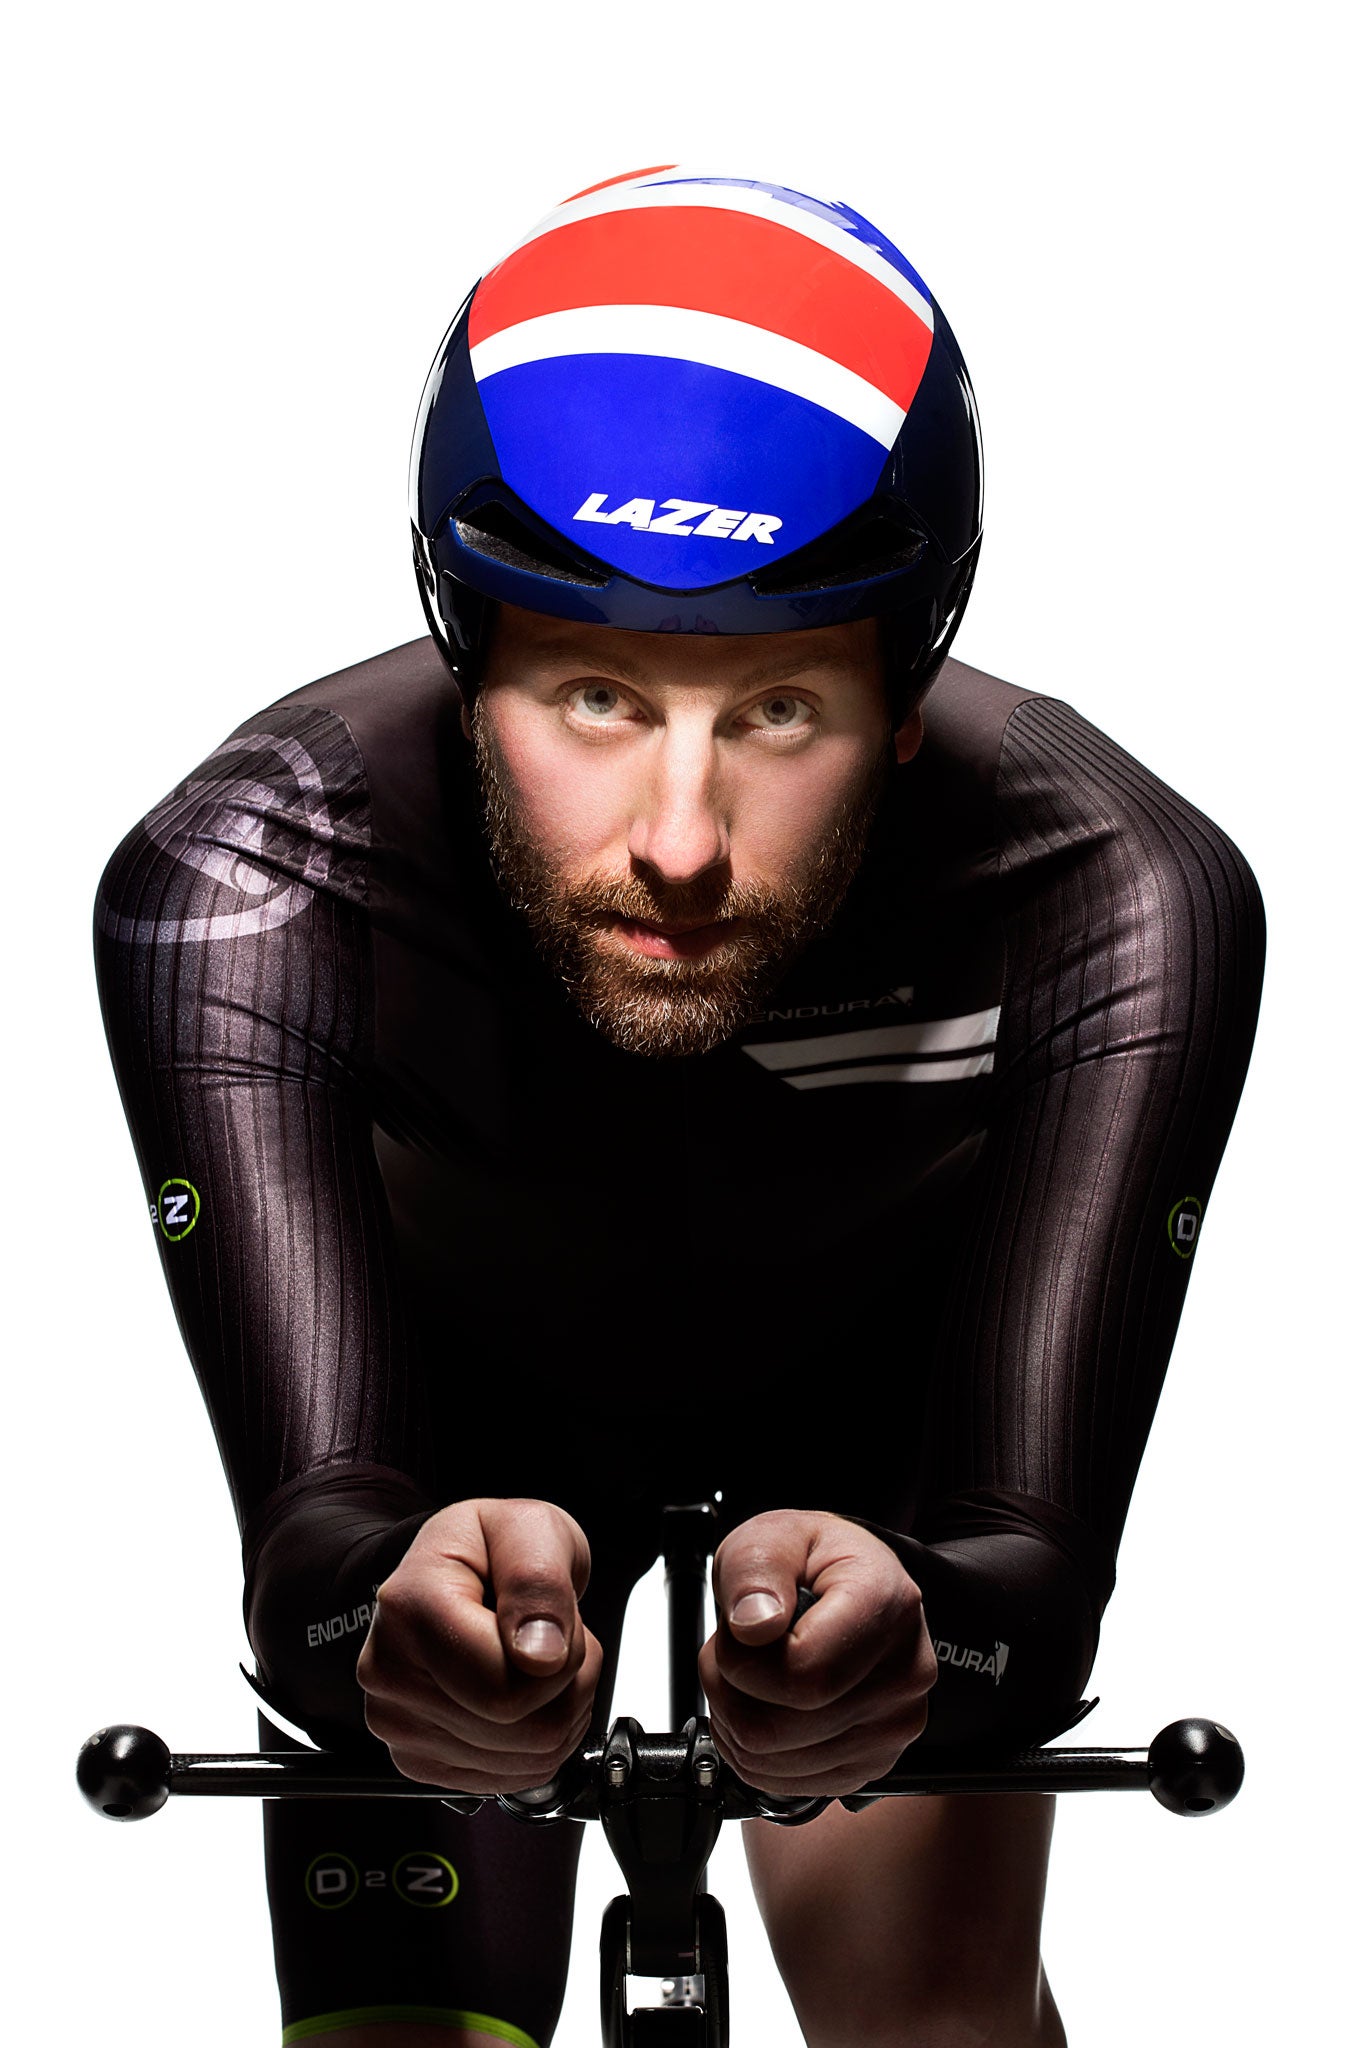 As Sir Bradley Wiggins attempts to smash the hour record